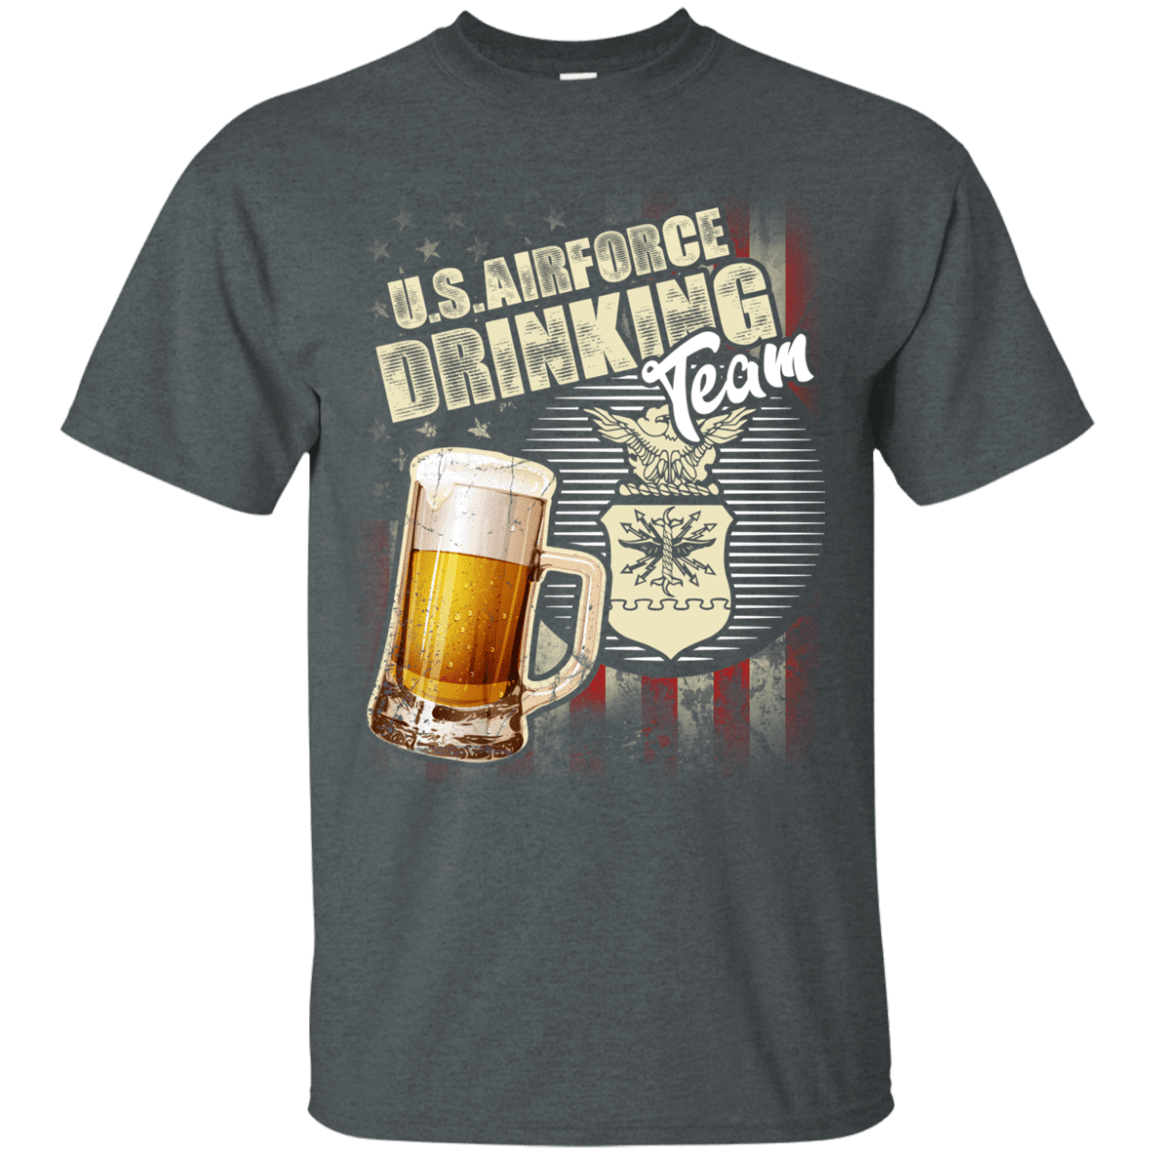 US Air Force Drinking Beer Team Front T Shirts-TShirt-USAF-Veterans Nation